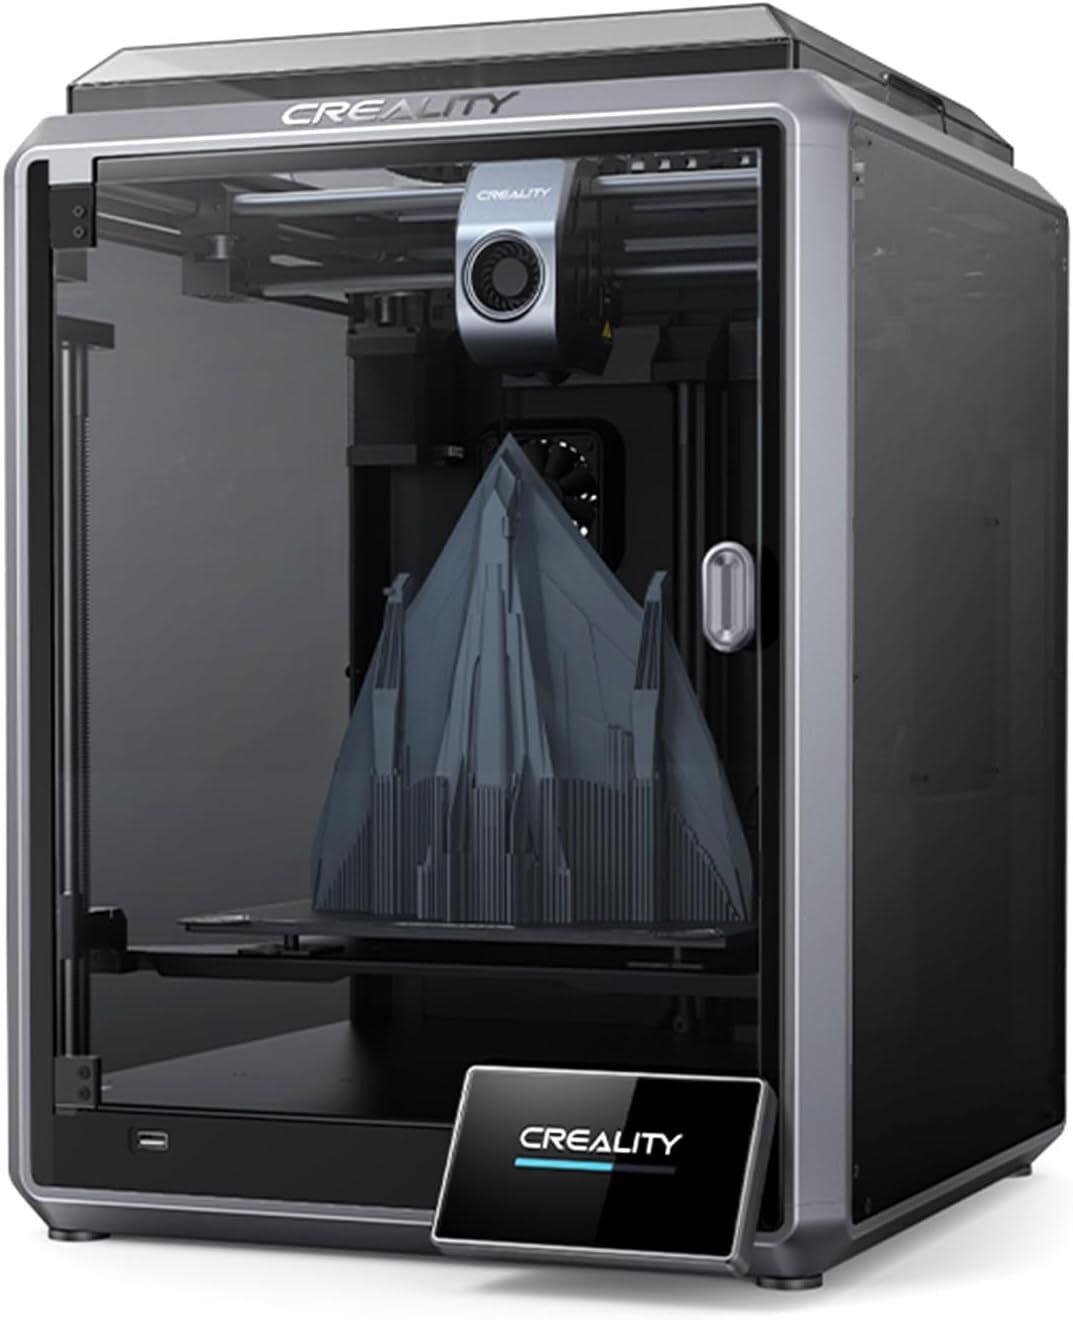 Official Creality K1 /K1 Max 3D Printer 600mm/s Max High Speed Auto Leveling US